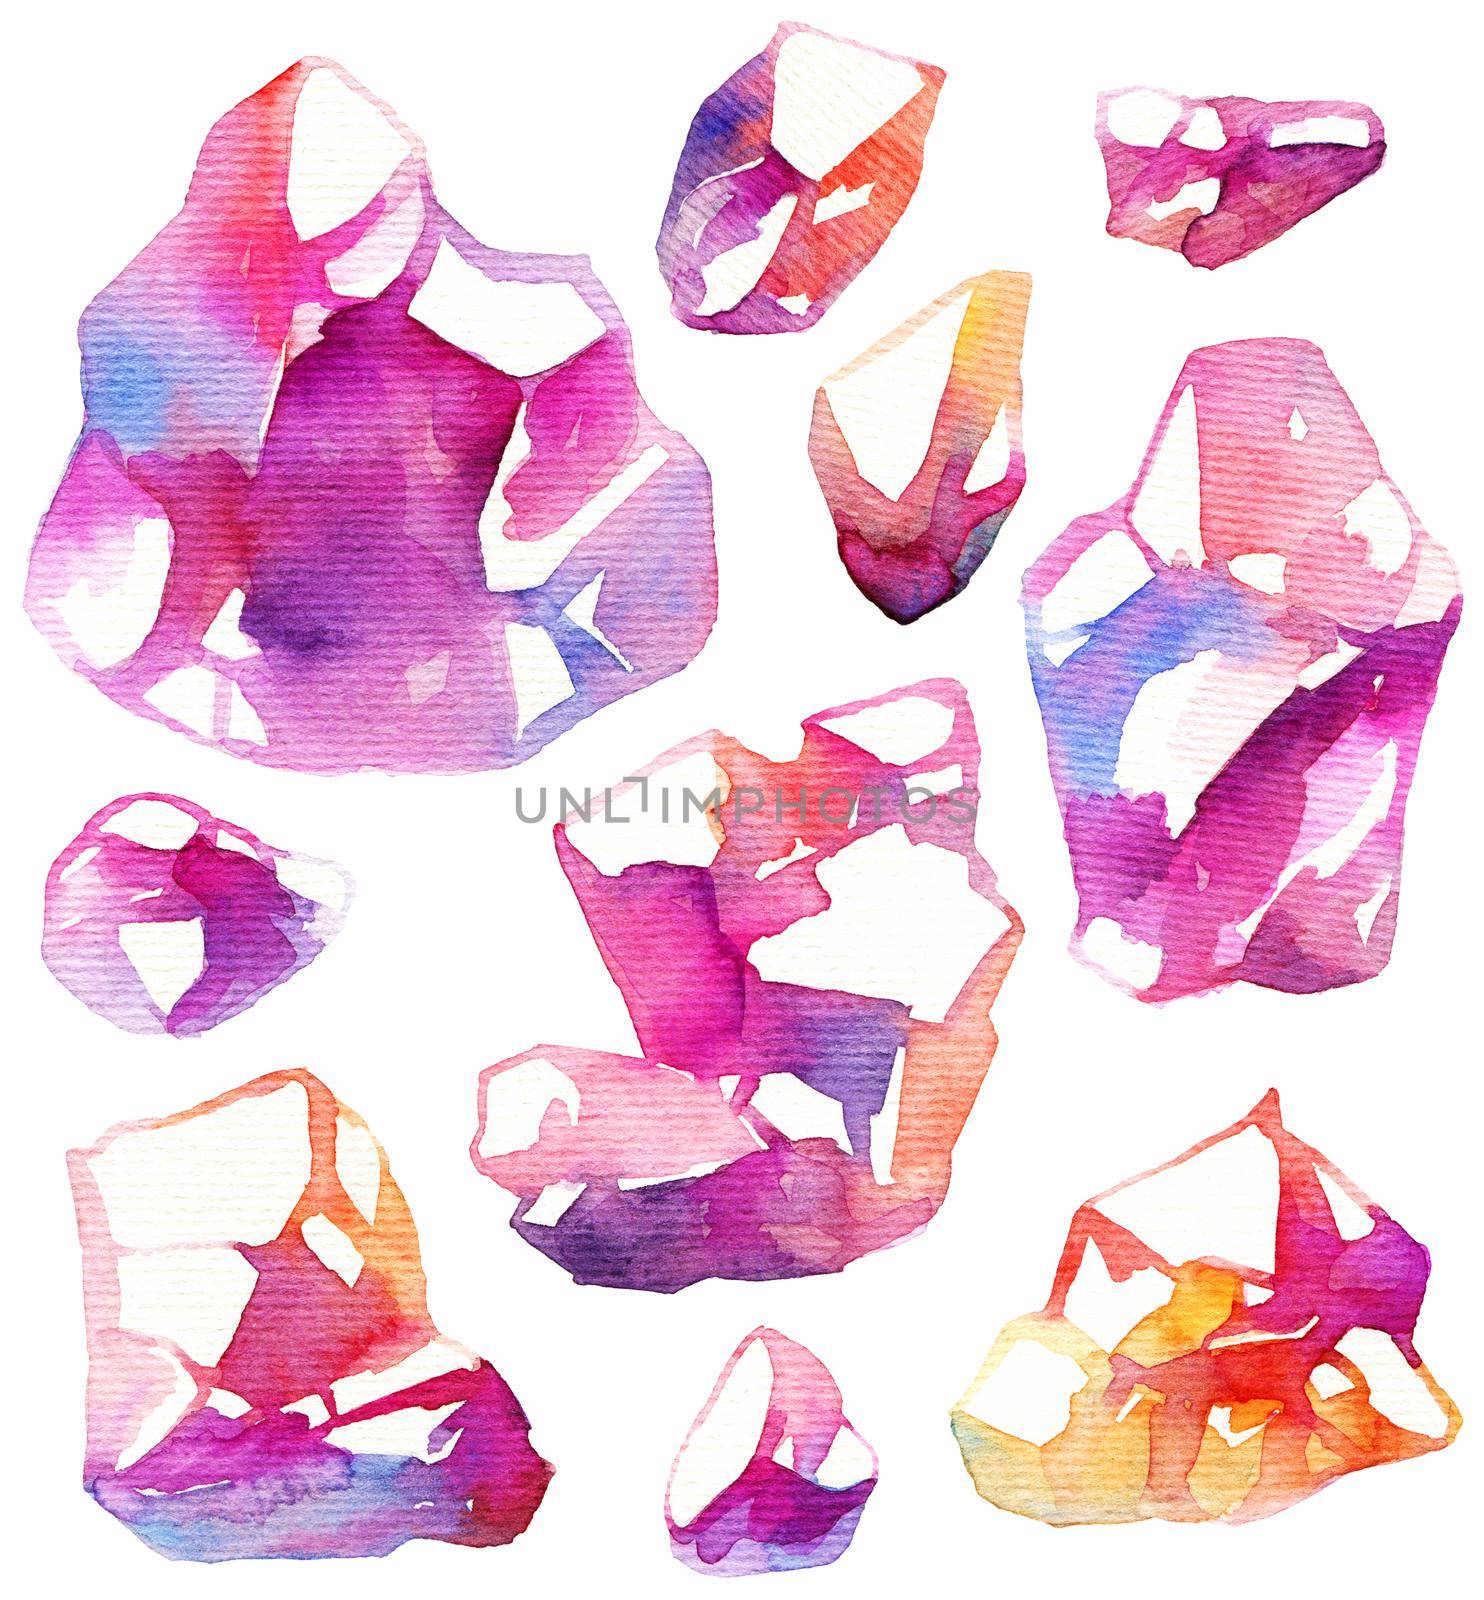 Hand-drawn watercolor crystals - painting on white background